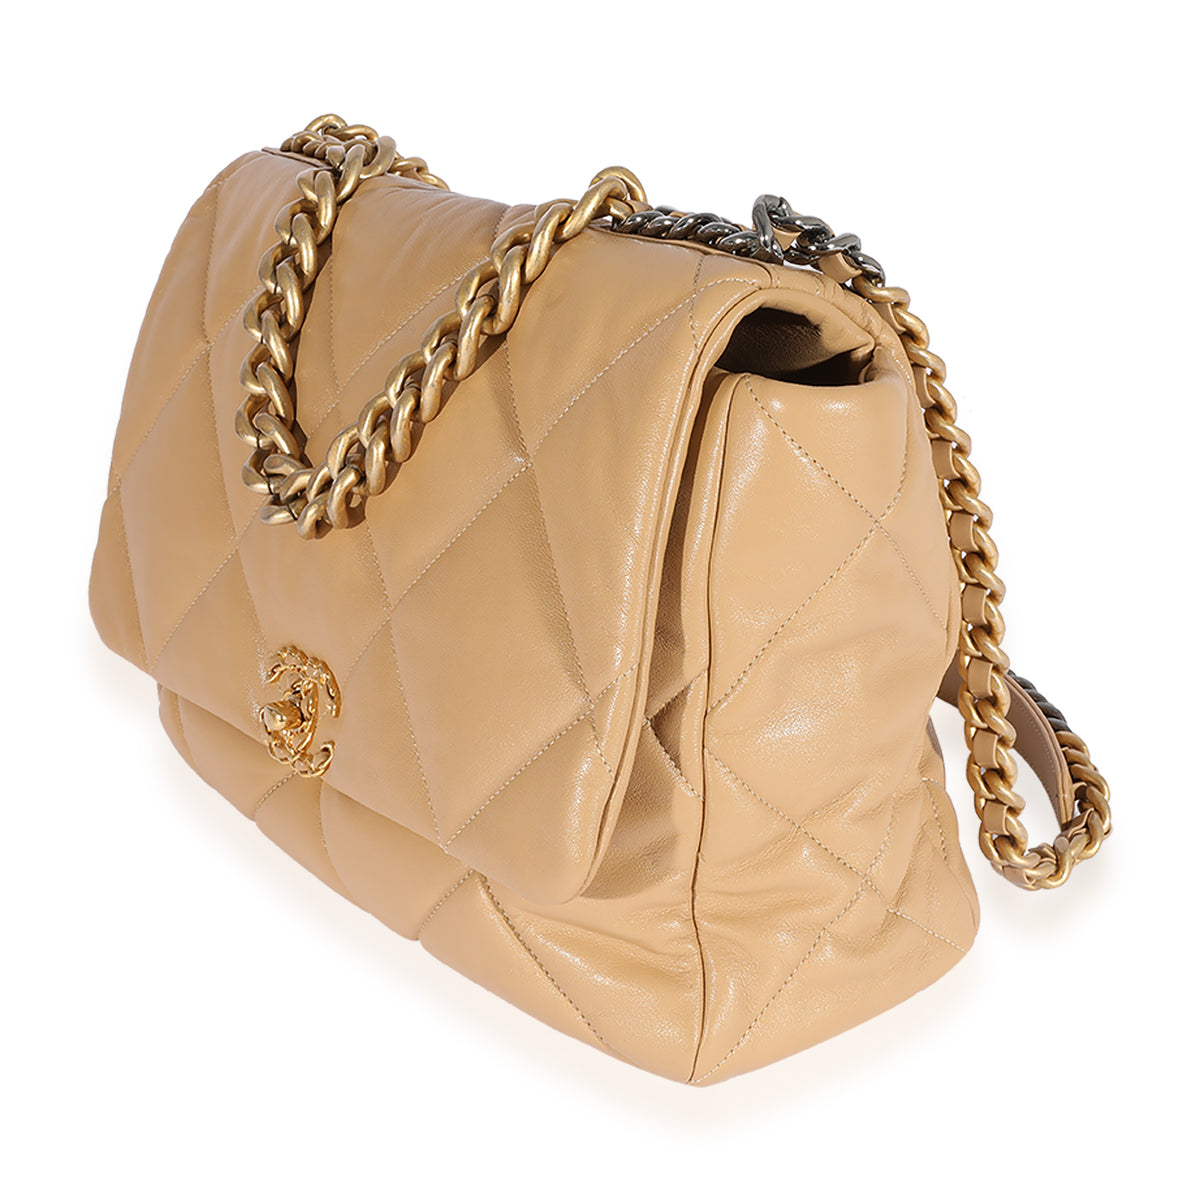 Chanel 19 Maxi Light Beige, As New in Dustbag